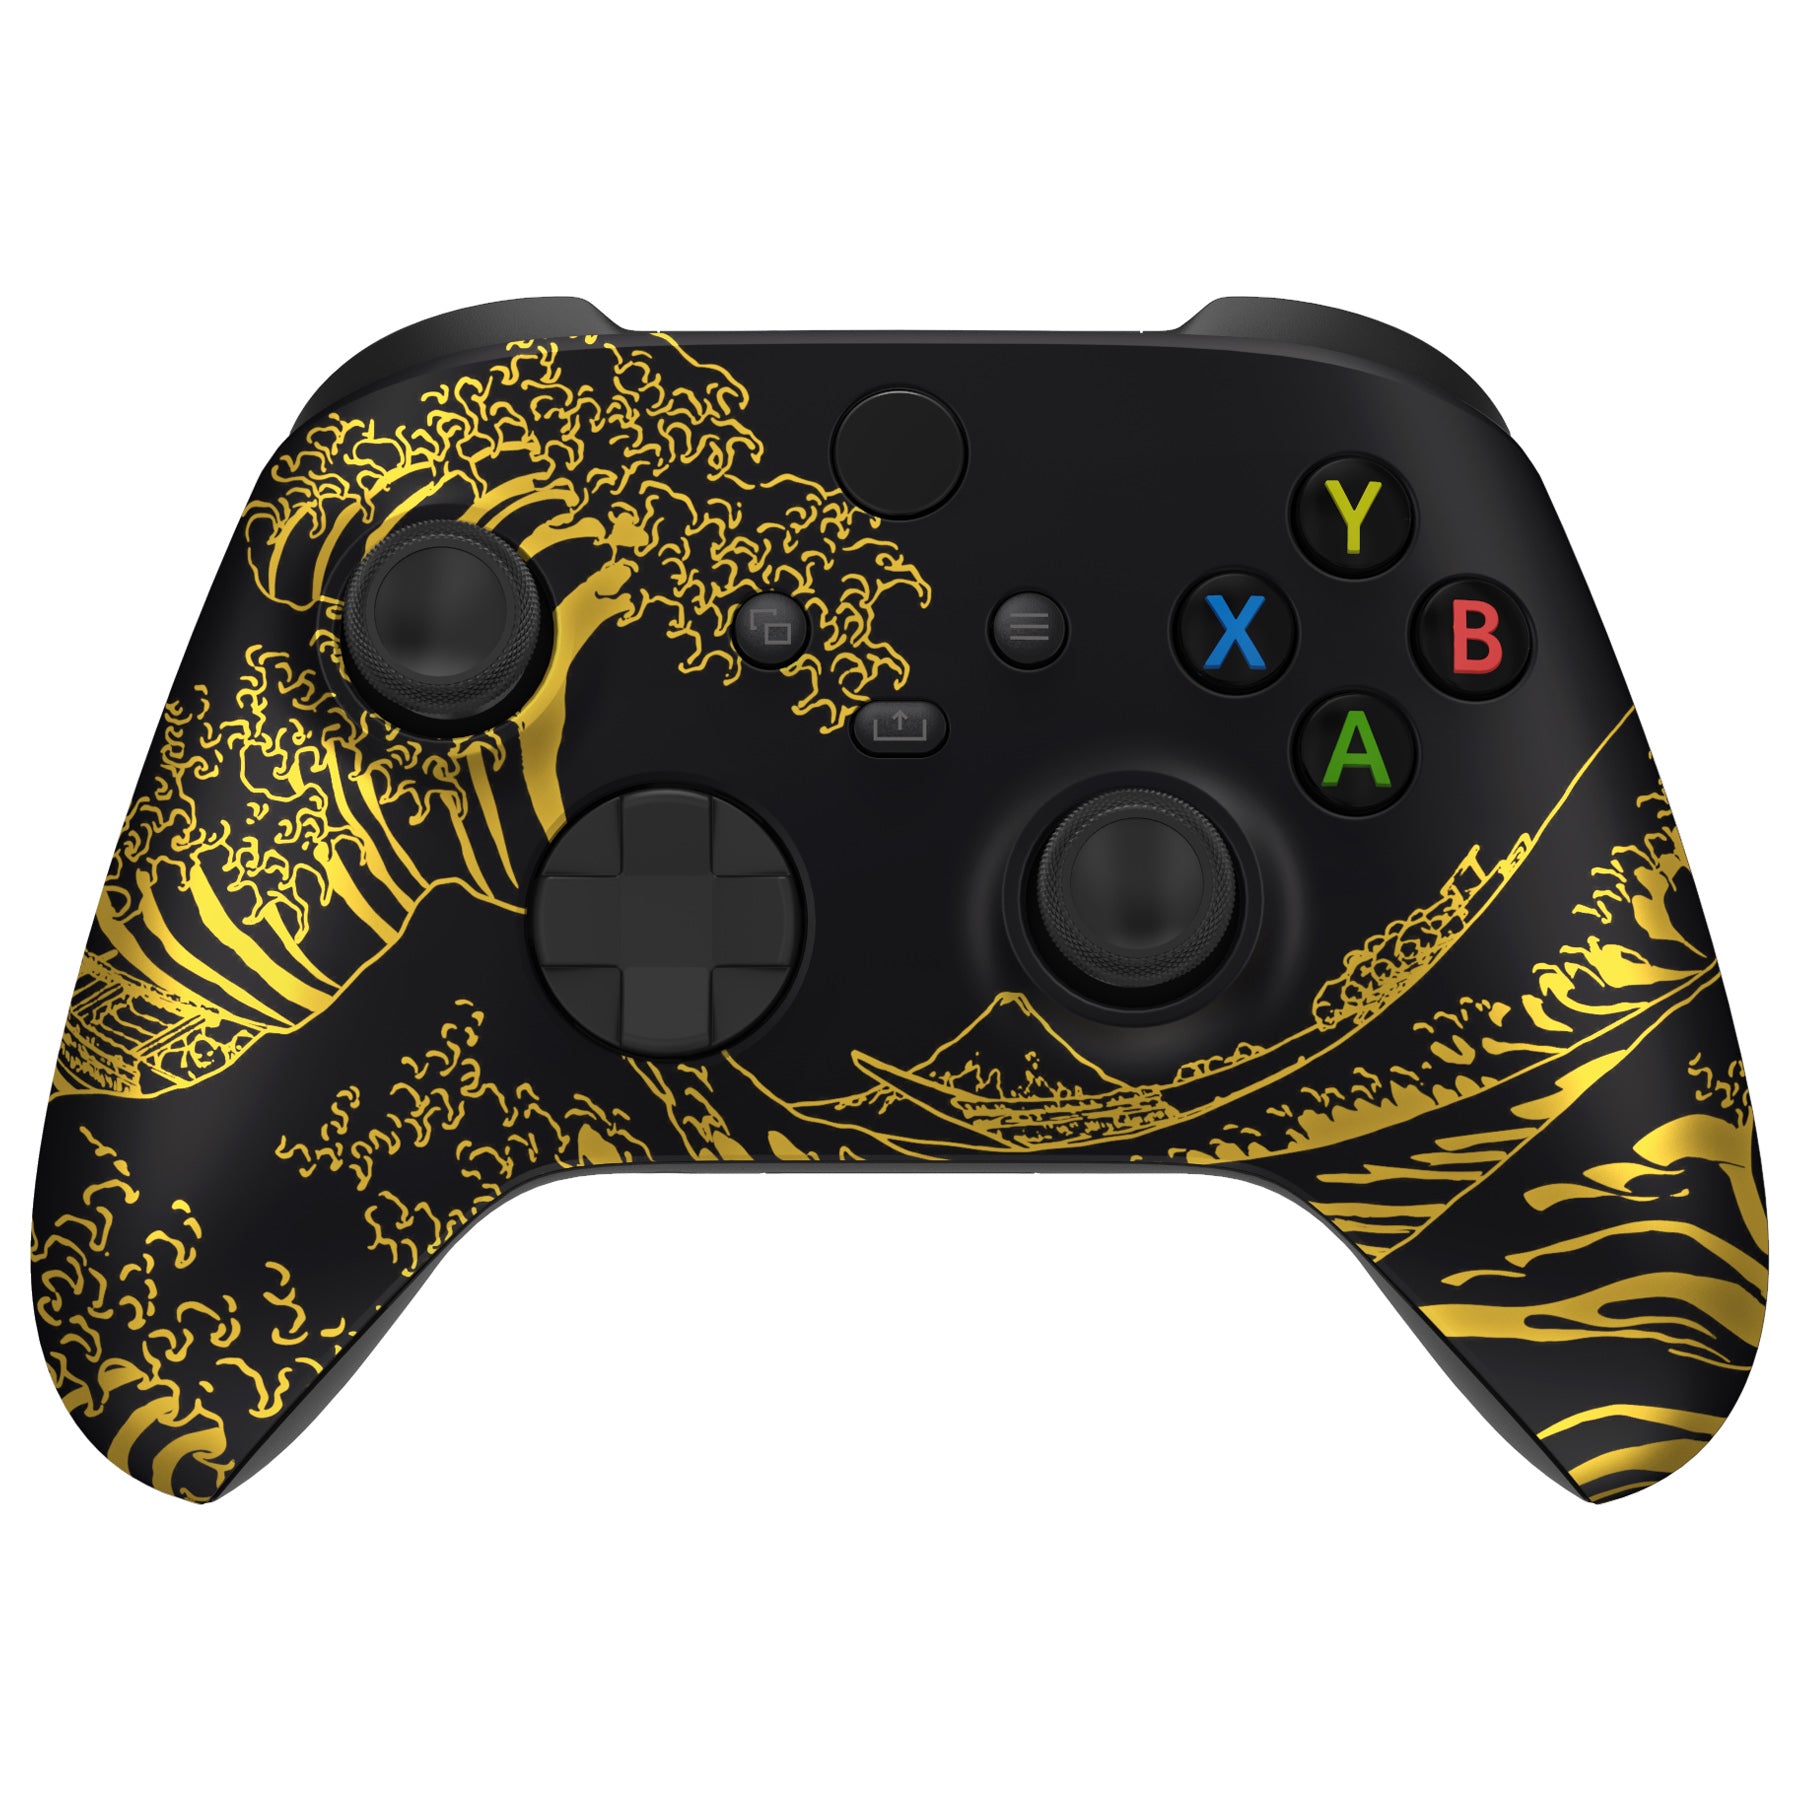 eXtremeRate Retail The Great GOLDEN Wave Off Kanagawa - Black Replacement Part Faceplate, Soft Touch Grip Housing Shell Case for Xbox Series S & Xbox Series X Controller Accessories - Controller NOT Included - FX3T188